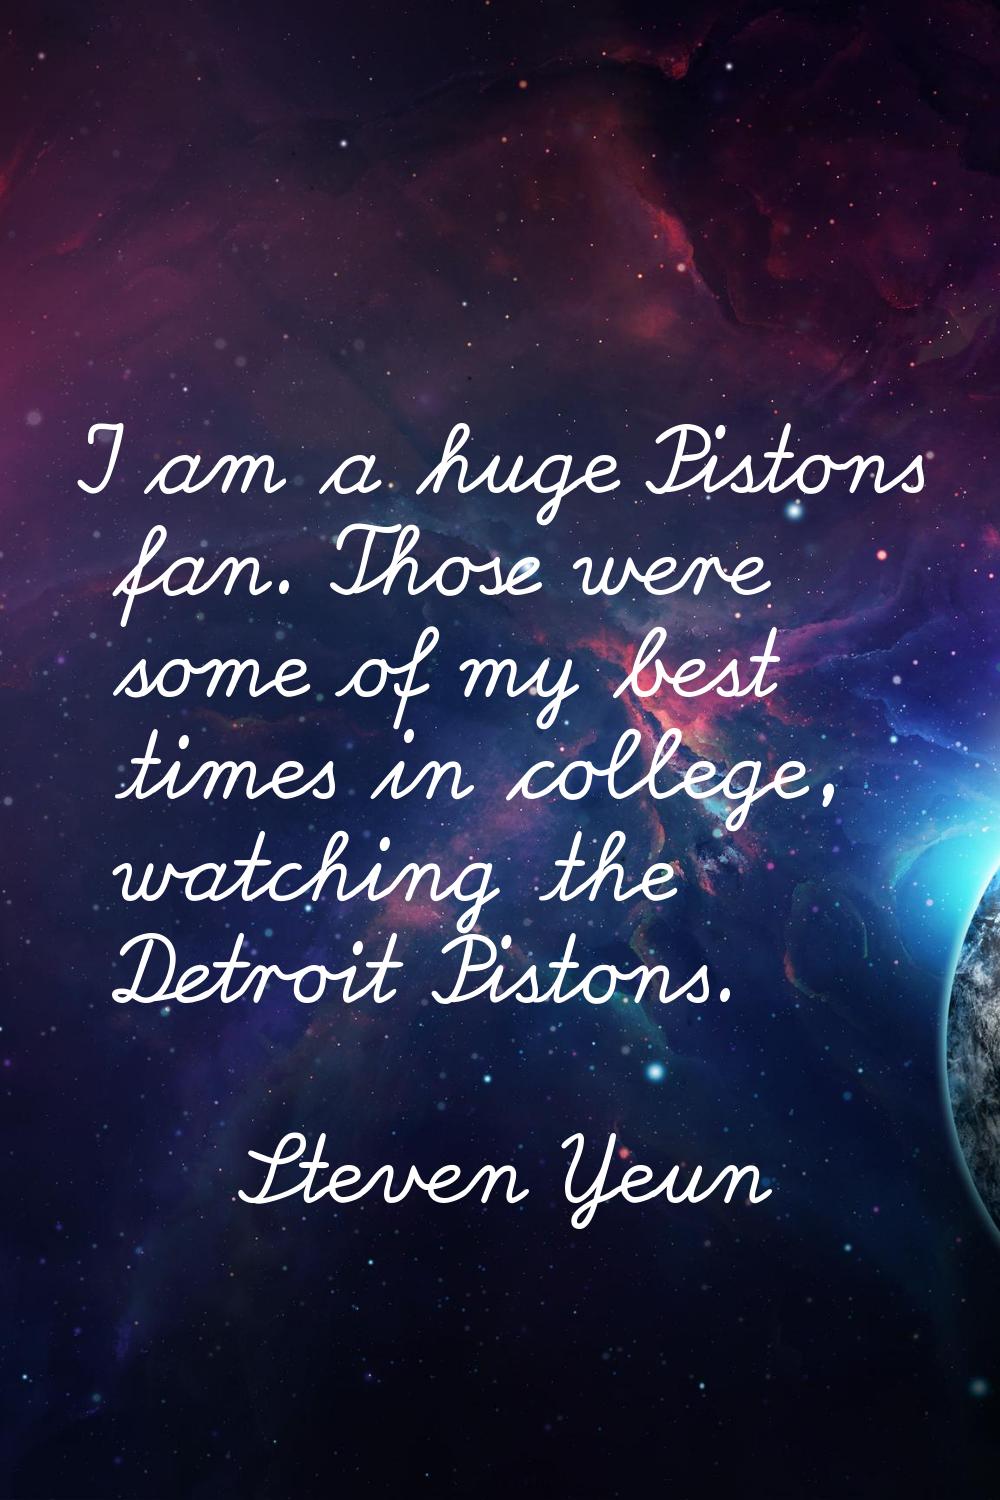 I am a huge Pistons fan. Those were some of my best times in college, watching the Detroit Pistons.